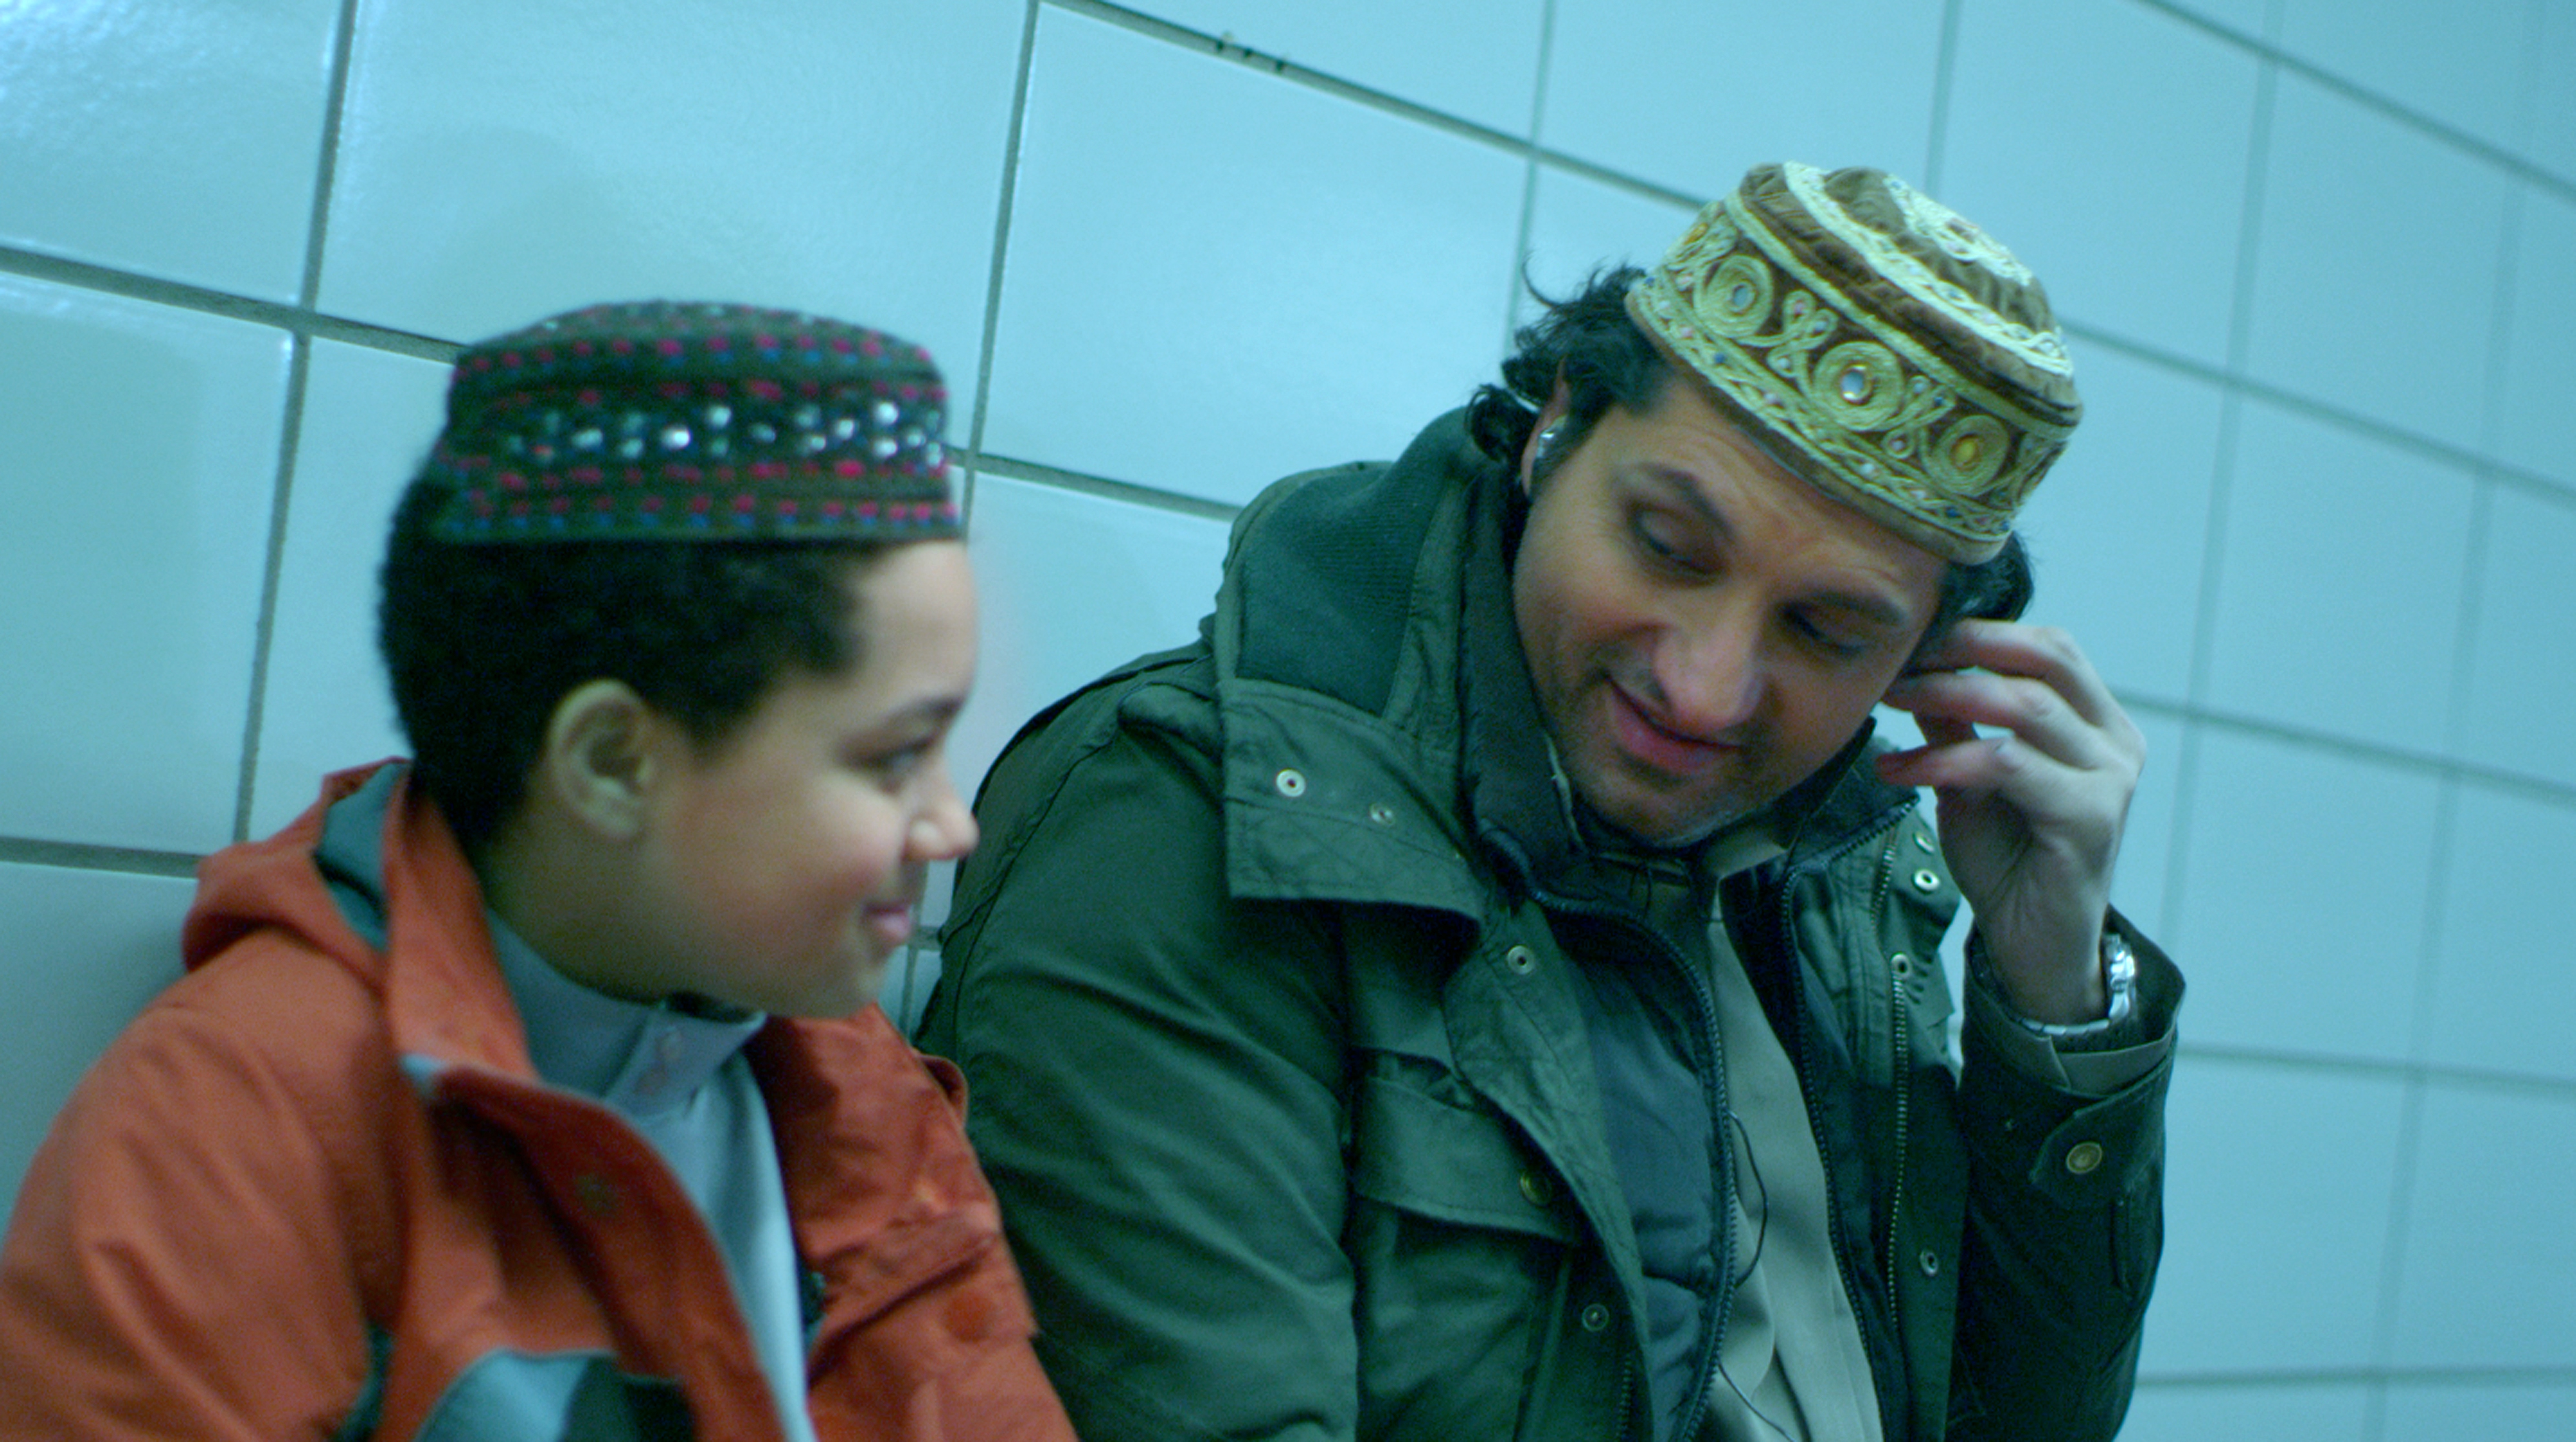 Production still of Danny Boushebel in the film BENEATH THE SURFACE aka SUBWAY STATION (2014).